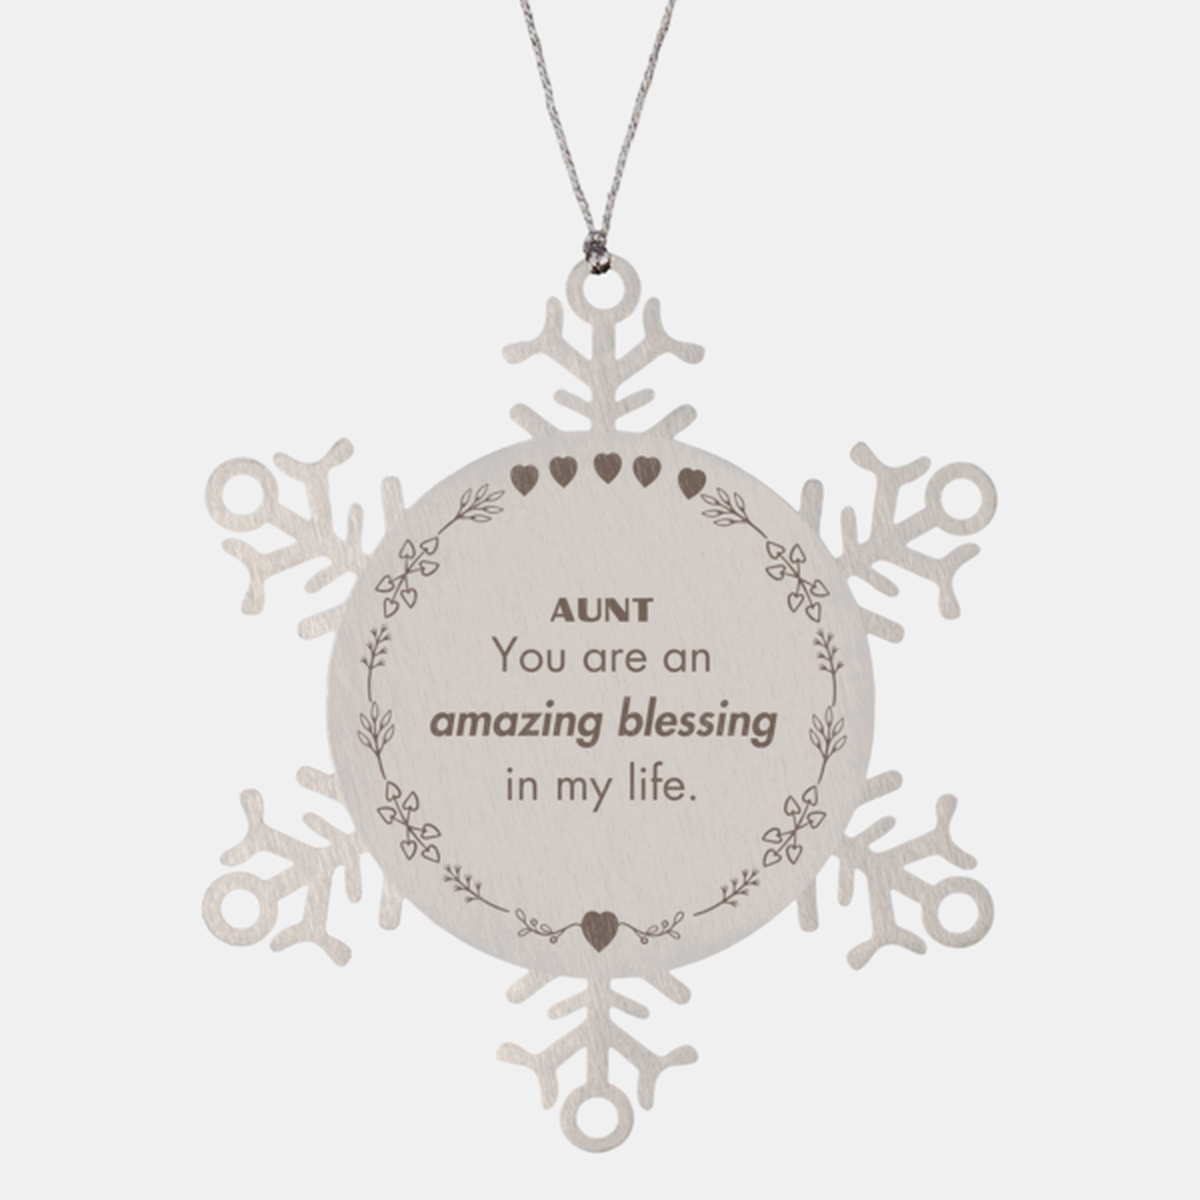 Aunt Snowflake Ornament, You are an amazing blessing in my life, Thank You Gifts For Aunt, Inspirational Birthday Christmas Unique Gifts For Aunt